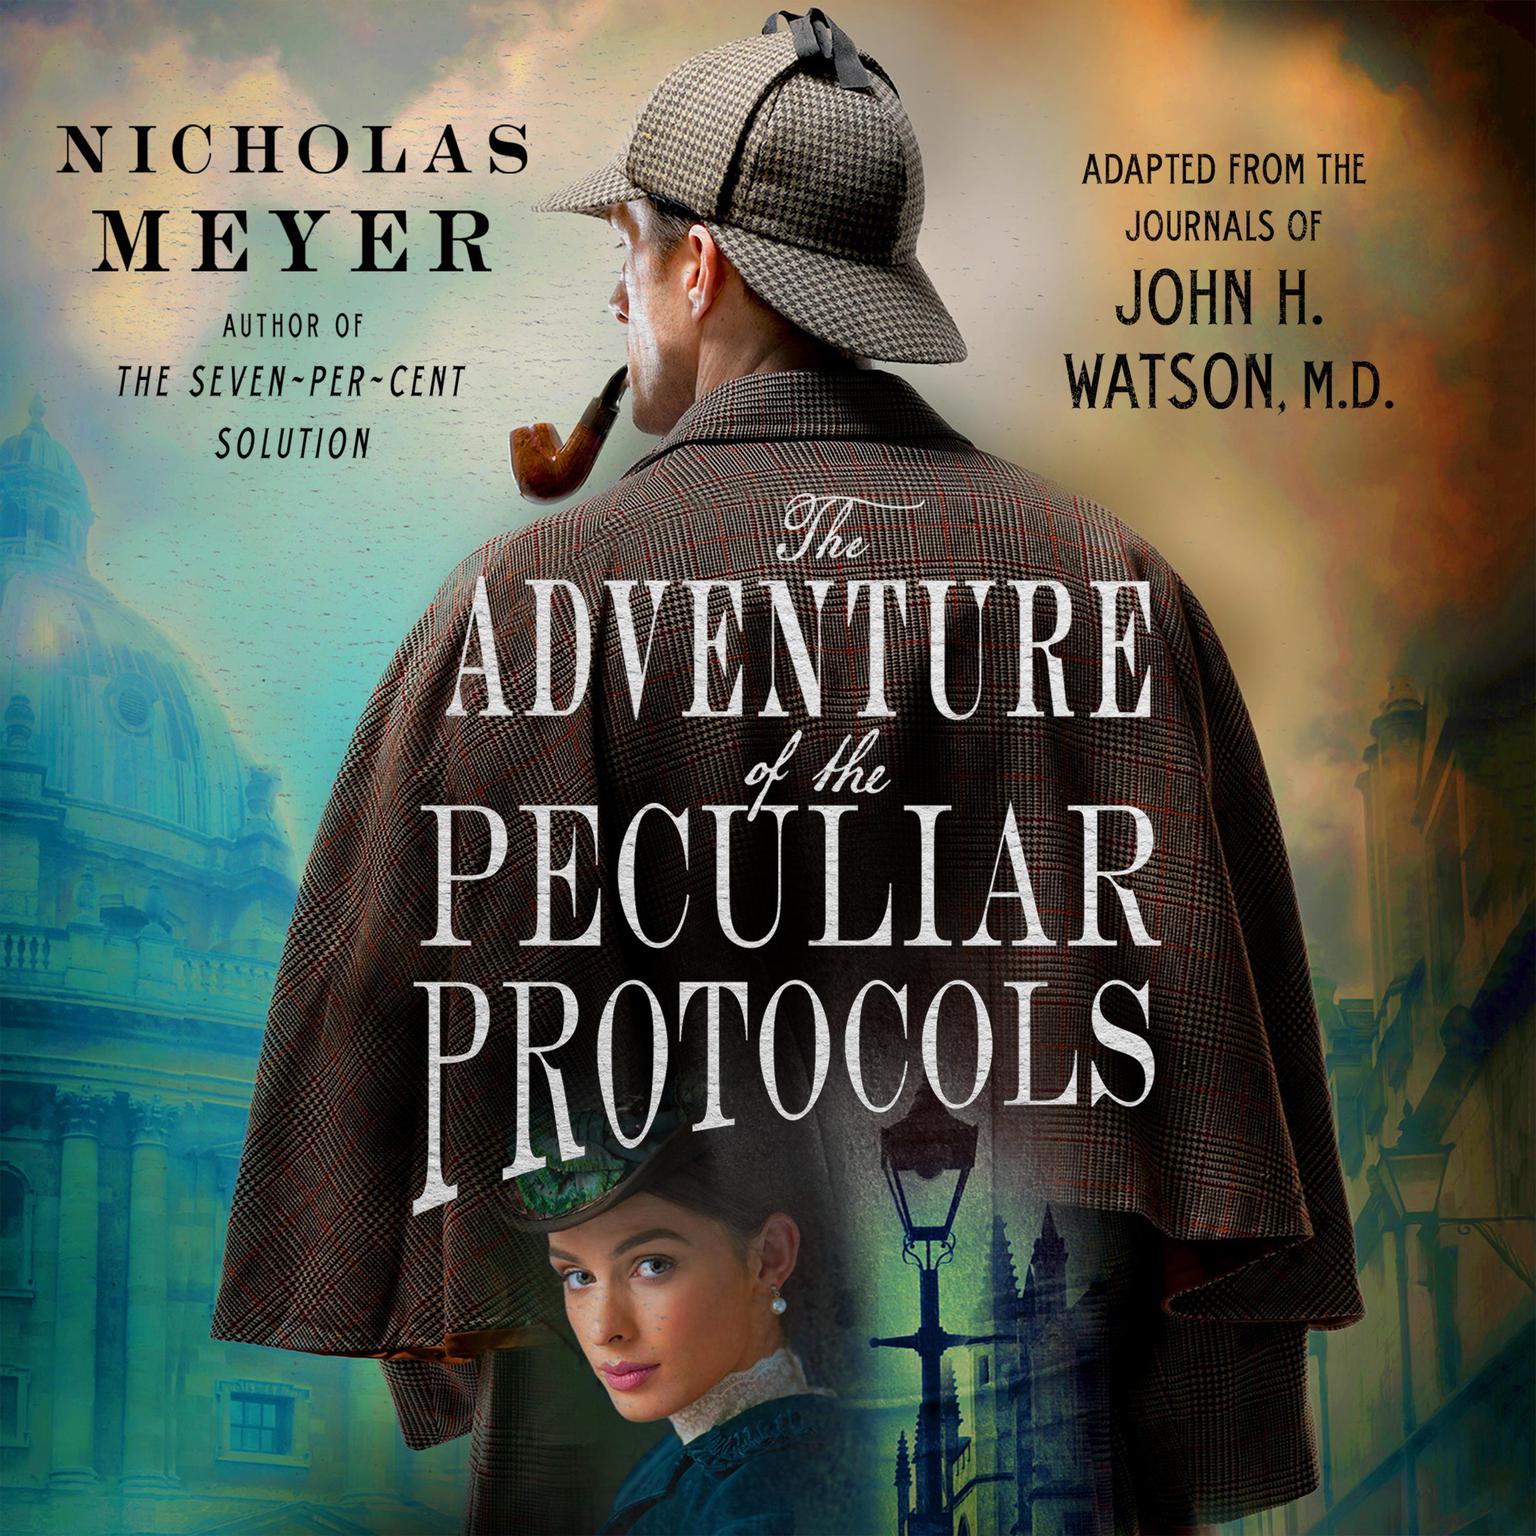 The Adventure of the Peculiar Protocols: Adapted from the Journals of John H. Watson, M.D. Audiobook, by Nicholas Meyer